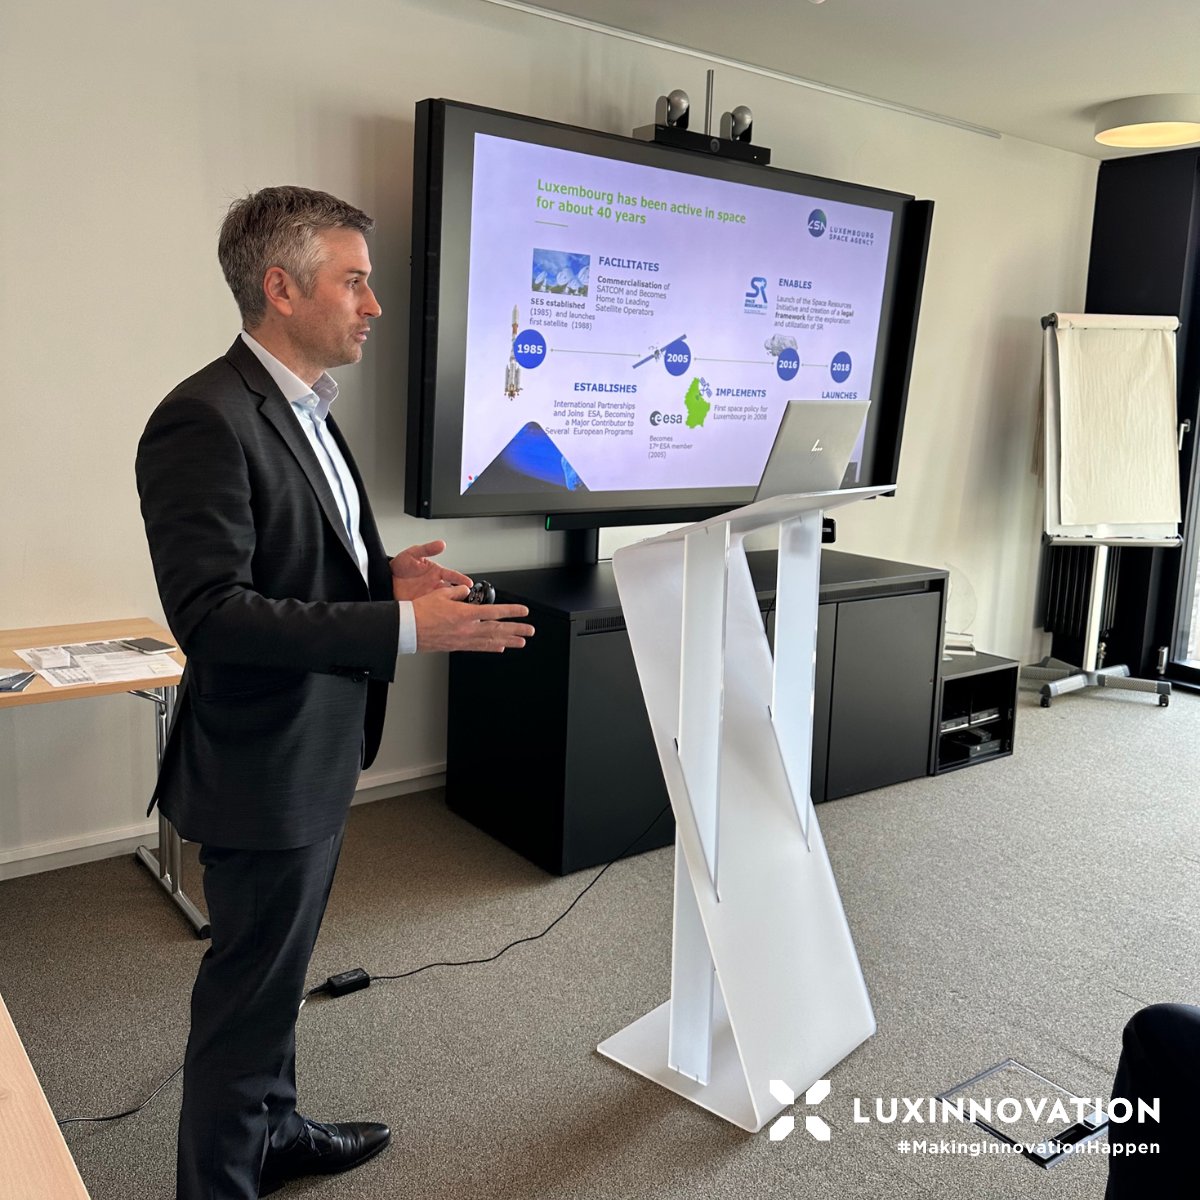 🤝 This morning, we had the pleasure of welcoming a business delegation from the Czech Republic at our premises of an interesting session on how the LSA, the LIST, the LHC and Luxinnovation jointly support development in #space and #defence.